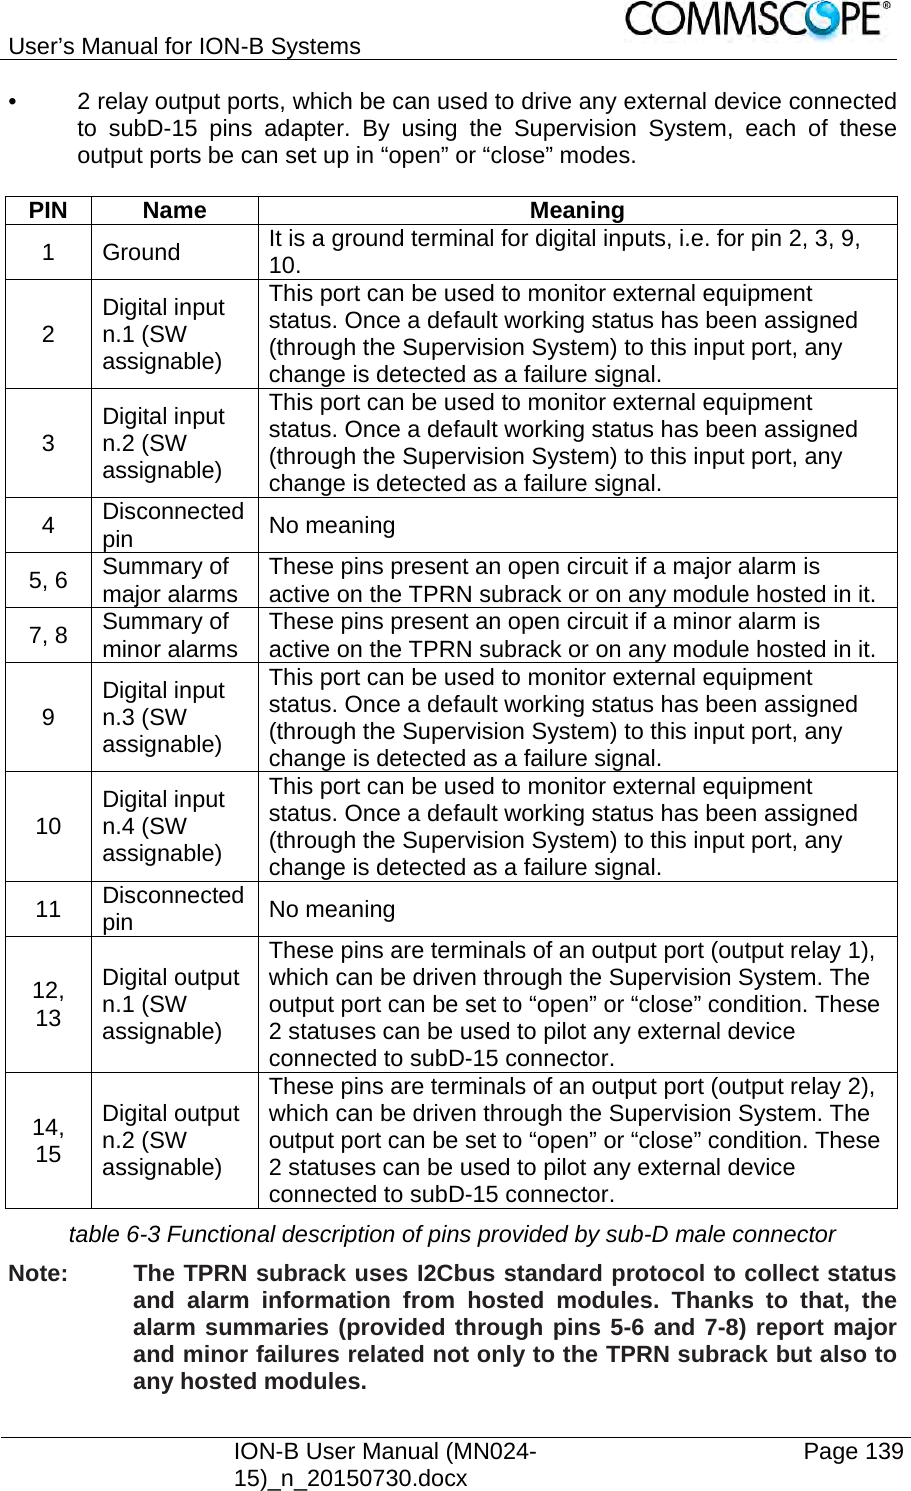 User’s Manual for ION-B Systems    ION-B User Manual (MN024-15)_n_20150730.docx  Page 139 •  2 relay output ports, which be can used to drive any external device connected to subD-15 pins adapter. By using the Supervision System, each of these output ports be can set up in “open” or “close” modes.  PIN Name  Meaning 1 Ground  It is a ground terminal for digital inputs, i.e. for pin 2, 3, 9, 10. 2  Digital input n.1 (SW assignable) This port can be used to monitor external equipment status. Once a default working status has been assigned (through the Supervision System) to this input port, any change is detected as a failure signal. 3  Digital input n.2 (SW assignable) This port can be used to monitor external equipment status. Once a default working status has been assigned (through the Supervision System) to this input port, any change is detected as a failure signal. 4  Disconnected pin  No meaning 5, 6  Summary of major alarms  These pins present an open circuit if a major alarm is active on the TPRN subrack or on any module hosted in it. 7, 8  Summary of minor alarms  These pins present an open circuit if a minor alarm is active on the TPRN subrack or on any module hosted in it. 9  Digital input n.3 (SW assignable) This port can be used to monitor external equipment status. Once a default working status has been assigned (through the Supervision System) to this input port, any change is detected as a failure signal.10  Digital input n.4 (SW assignable) This port can be used to monitor external equipment status. Once a default working status has been assigned (through the Supervision System) to this input port, any change is detected as a failure signal. 11  Disconnected pin  No meaning 12, 13 Digital output n.1 (SW assignable) These pins are terminals of an output port (output relay 1), which can be driven through the Supervision System. The output port can be set to “open” or “close” condition. These 2 statuses can be used to pilot any external device connected to subD-15 connector. 14, 15 Digital output n.2 (SW assignable) These pins are terminals of an output port (output relay 2), which can be driven through the Supervision System. The output port can be set to “open” or “close” condition. These 2 statuses can be used to pilot any external device connected to subD-15 connector. table 6-3 Functional description of pins provided by sub-D male connector Note:  The TPRN subrack uses I2Cbus standard protocol to collect status and alarm information from hosted modules. Thanks to that, the alarm summaries (provided through pins 5-6 and 7-8) report major and minor failures related not only to the TPRN subrack but also to any hosted modules. 